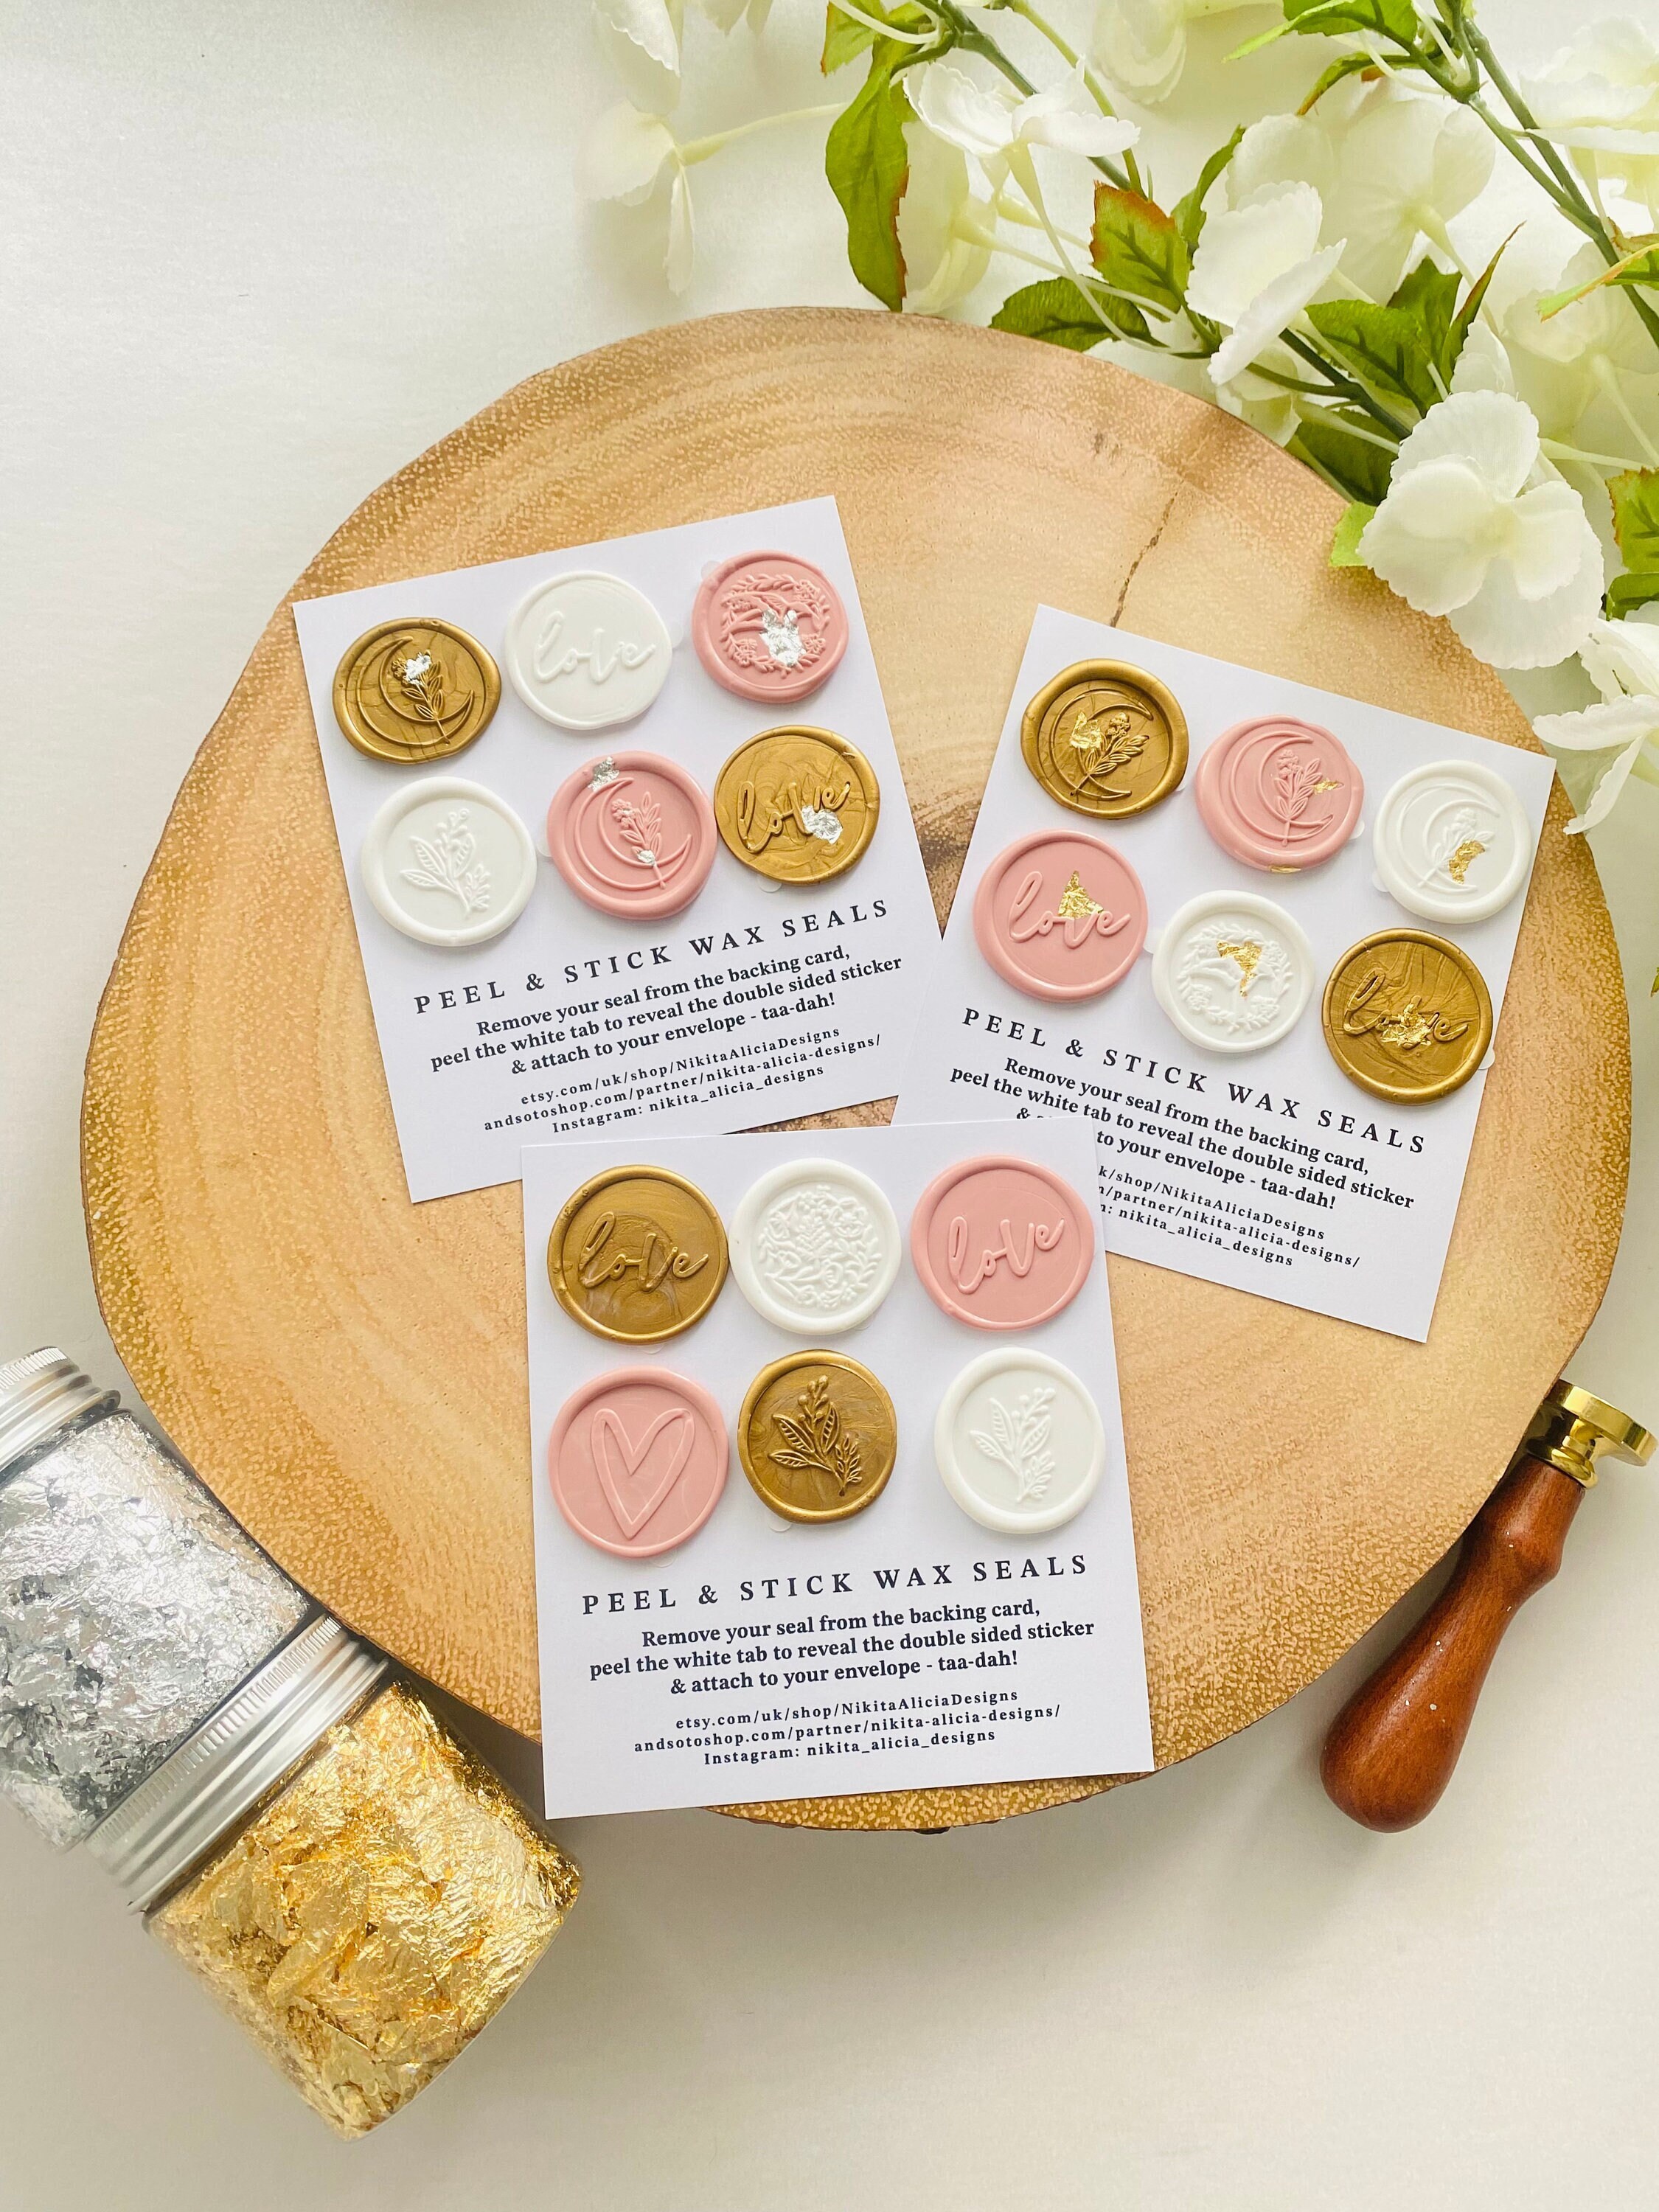  50 Pack Self Adhesive Wax Seal Stickers, Heart Gold Stickers,  Pre-Made Real Wax Seals, Envelope Seal Stickers, Envelope Seals, Wedding  Envelope Seals, Wedding Invitation Stickers,Birthday Baby Shower